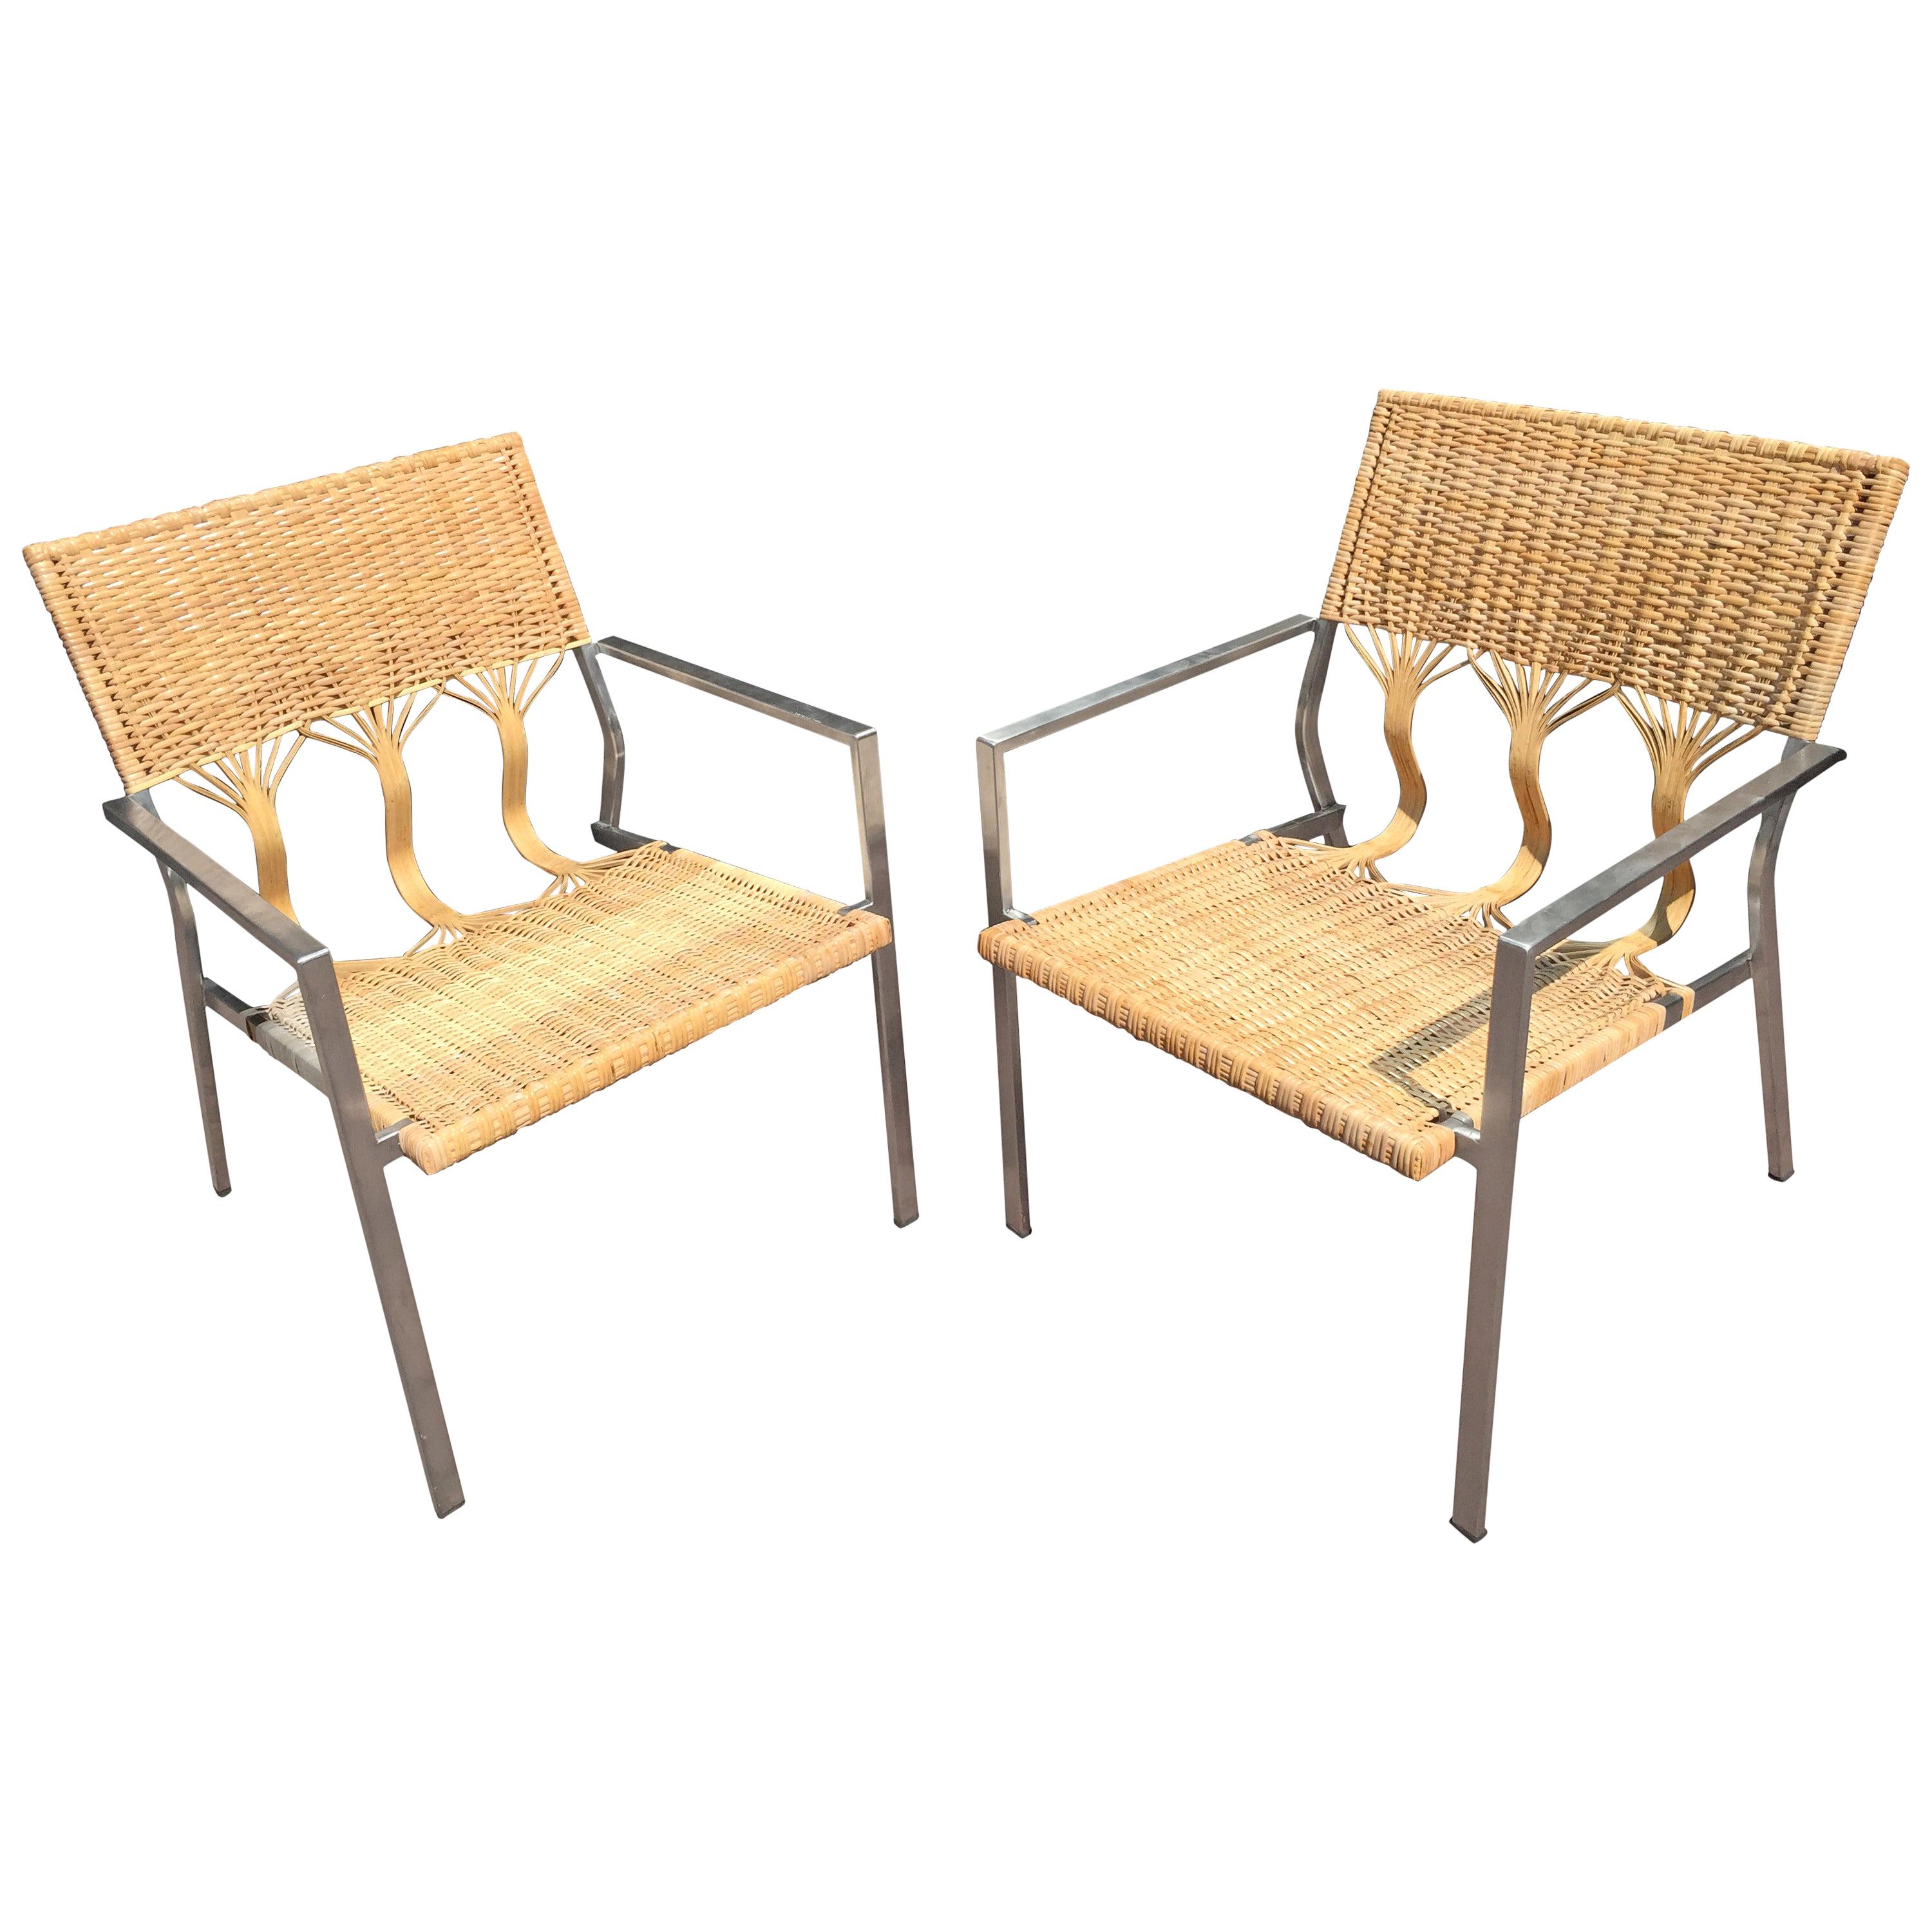 Pair of Woven Bamboo and Rattan Chairs by Adrien Gardere For Sale